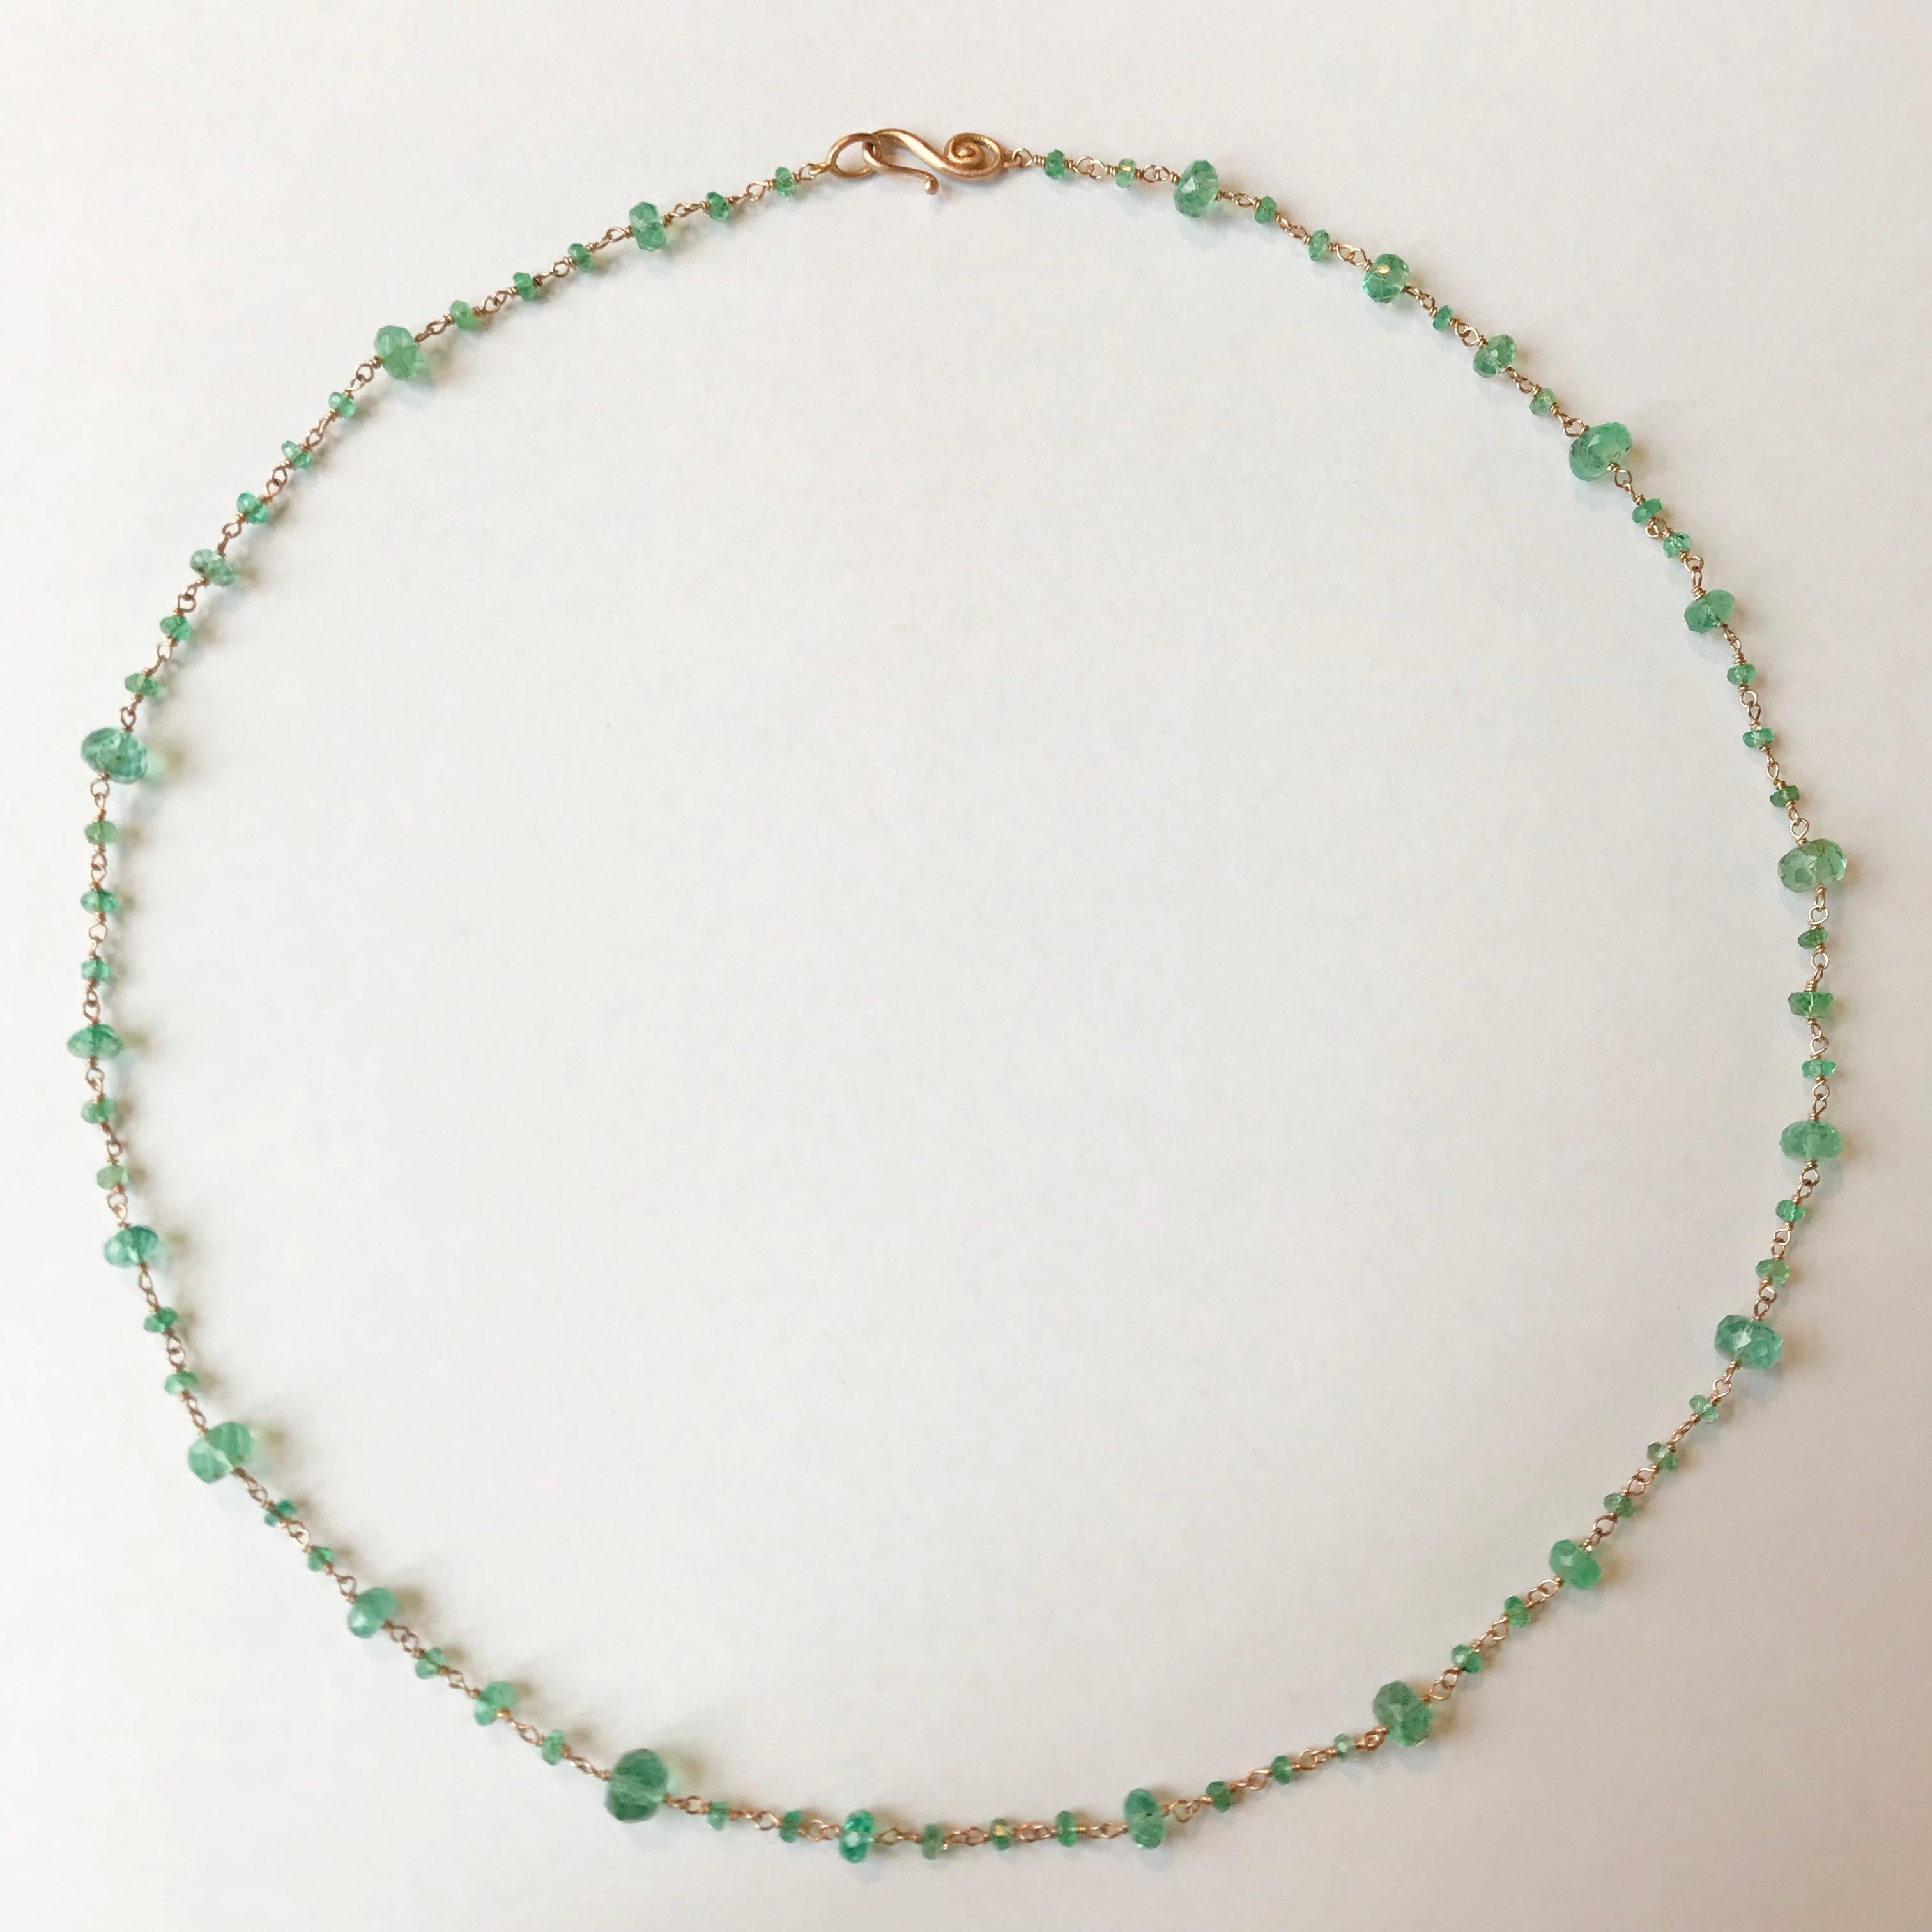 Dalben Emerald Beads Rose Gold Necklace In New Condition For Sale In Como, IT